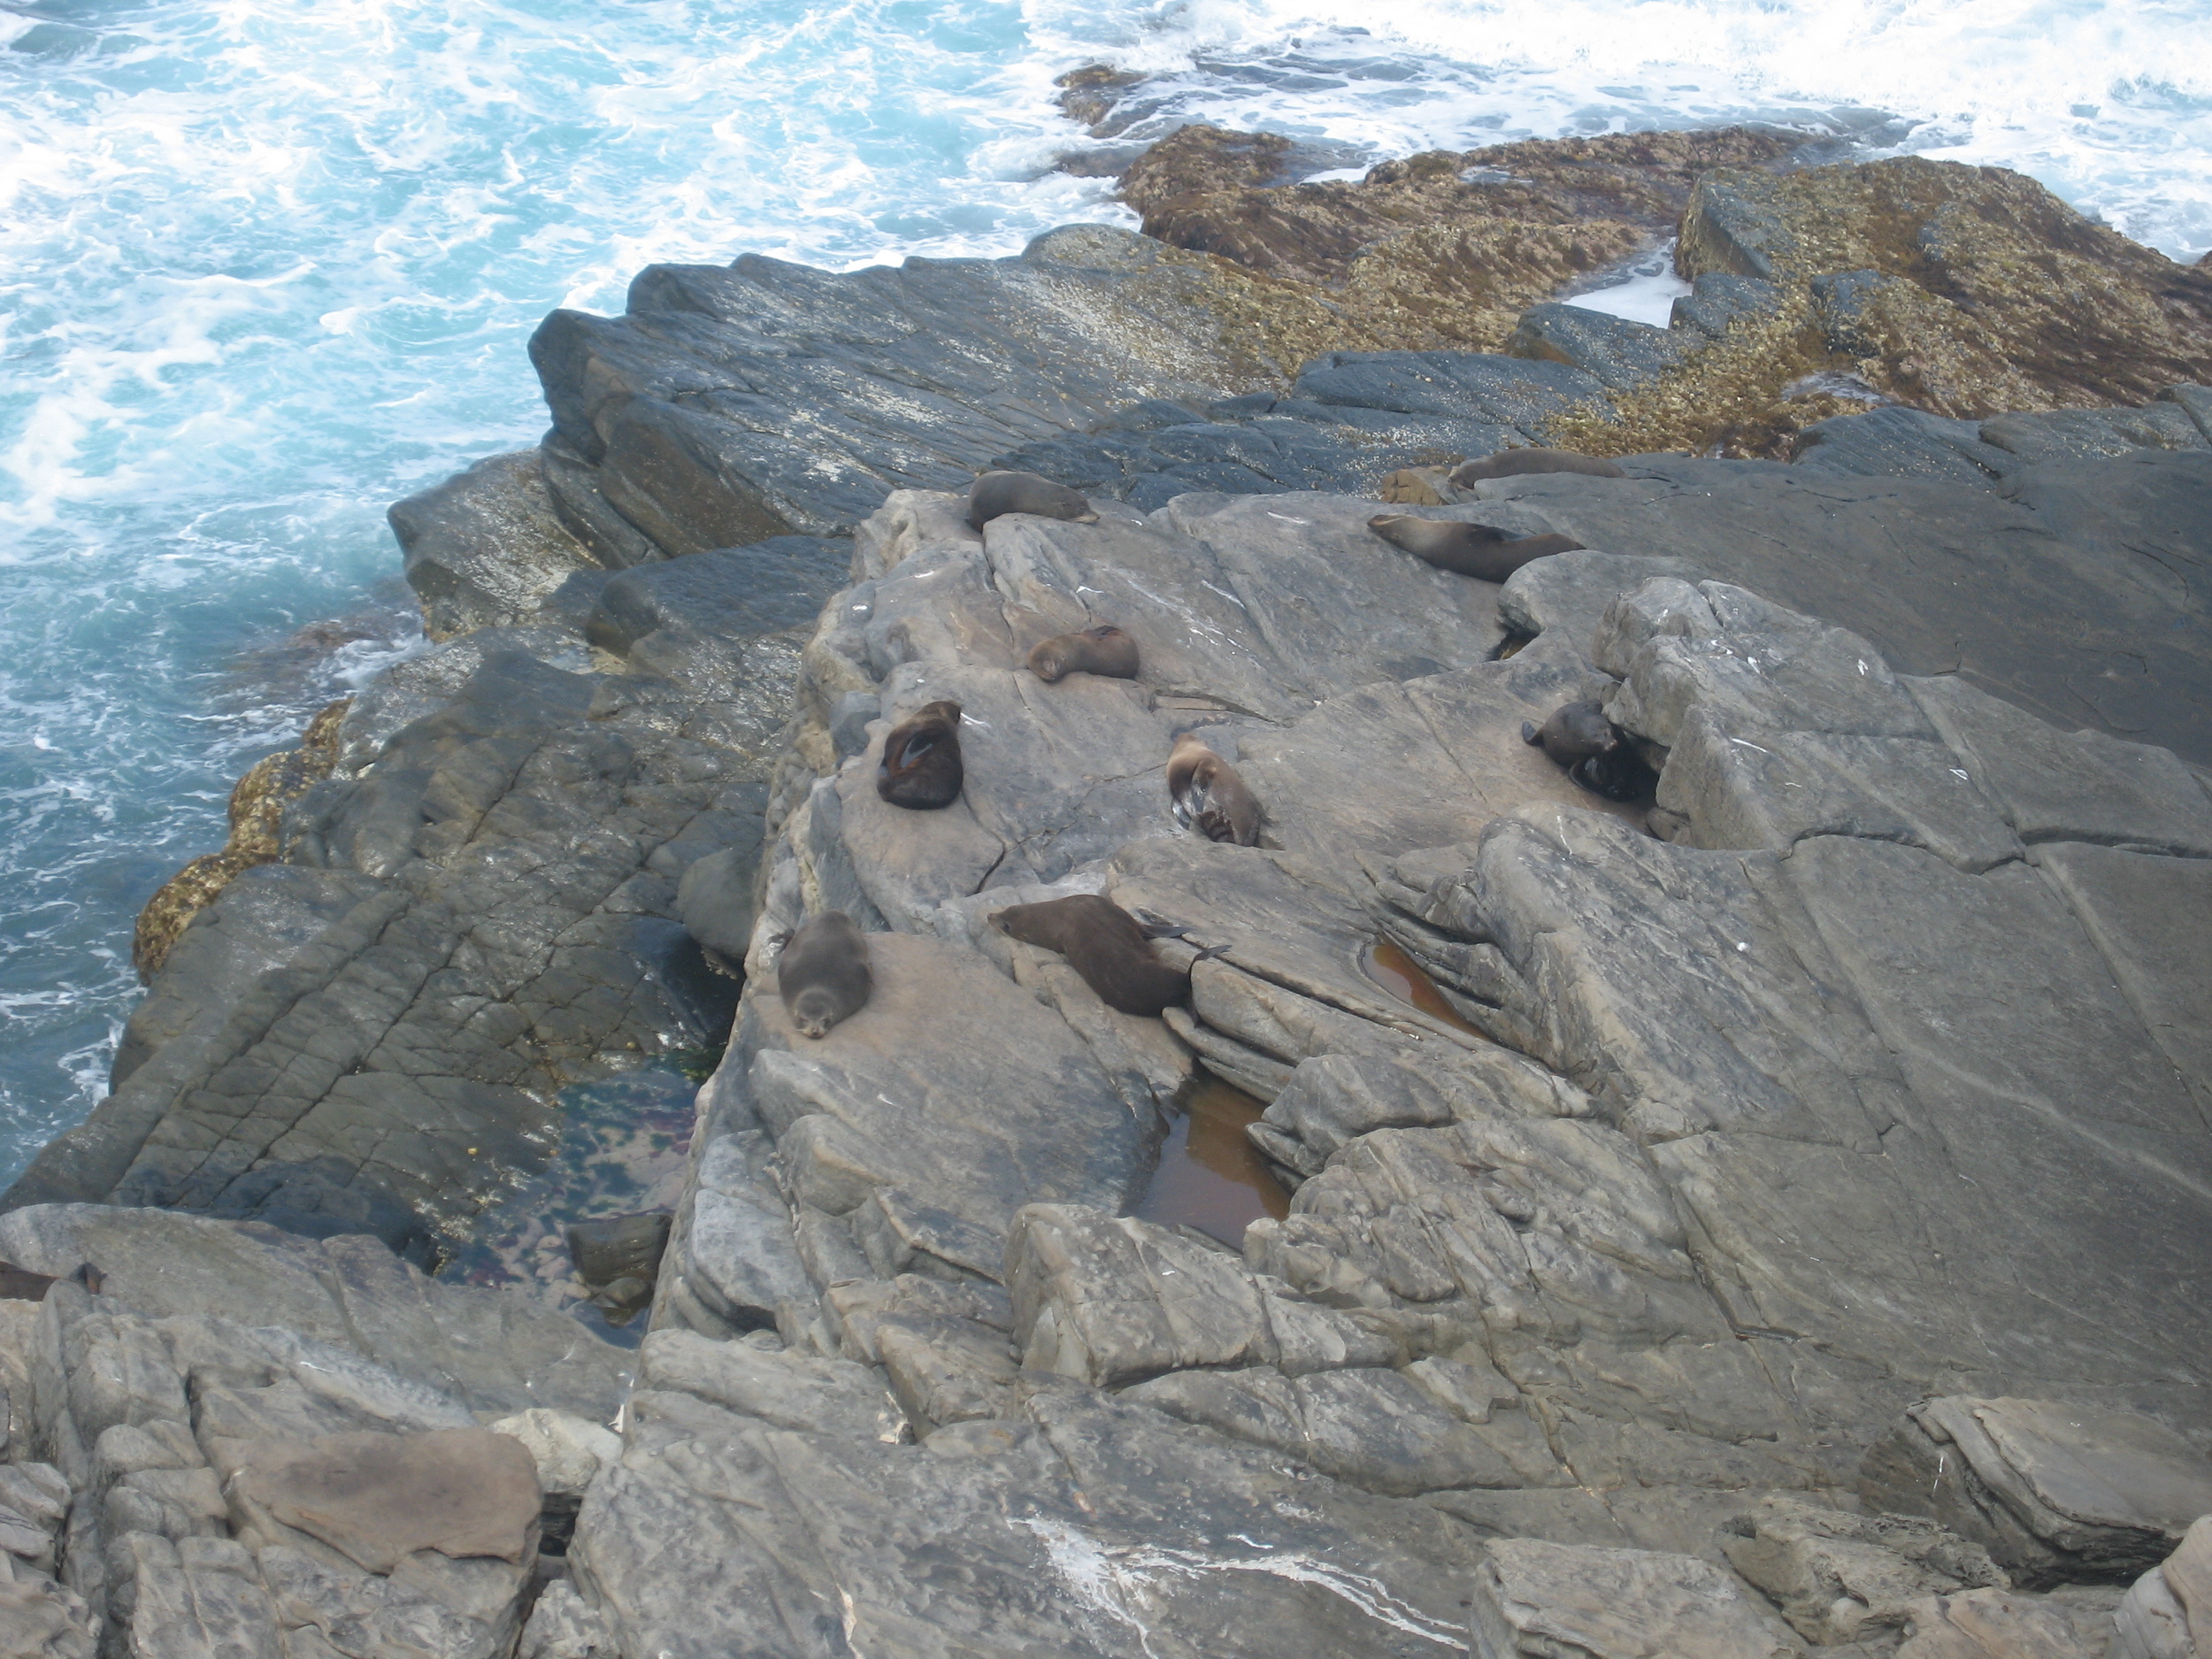 Sea Lions at Admiral's Arch!